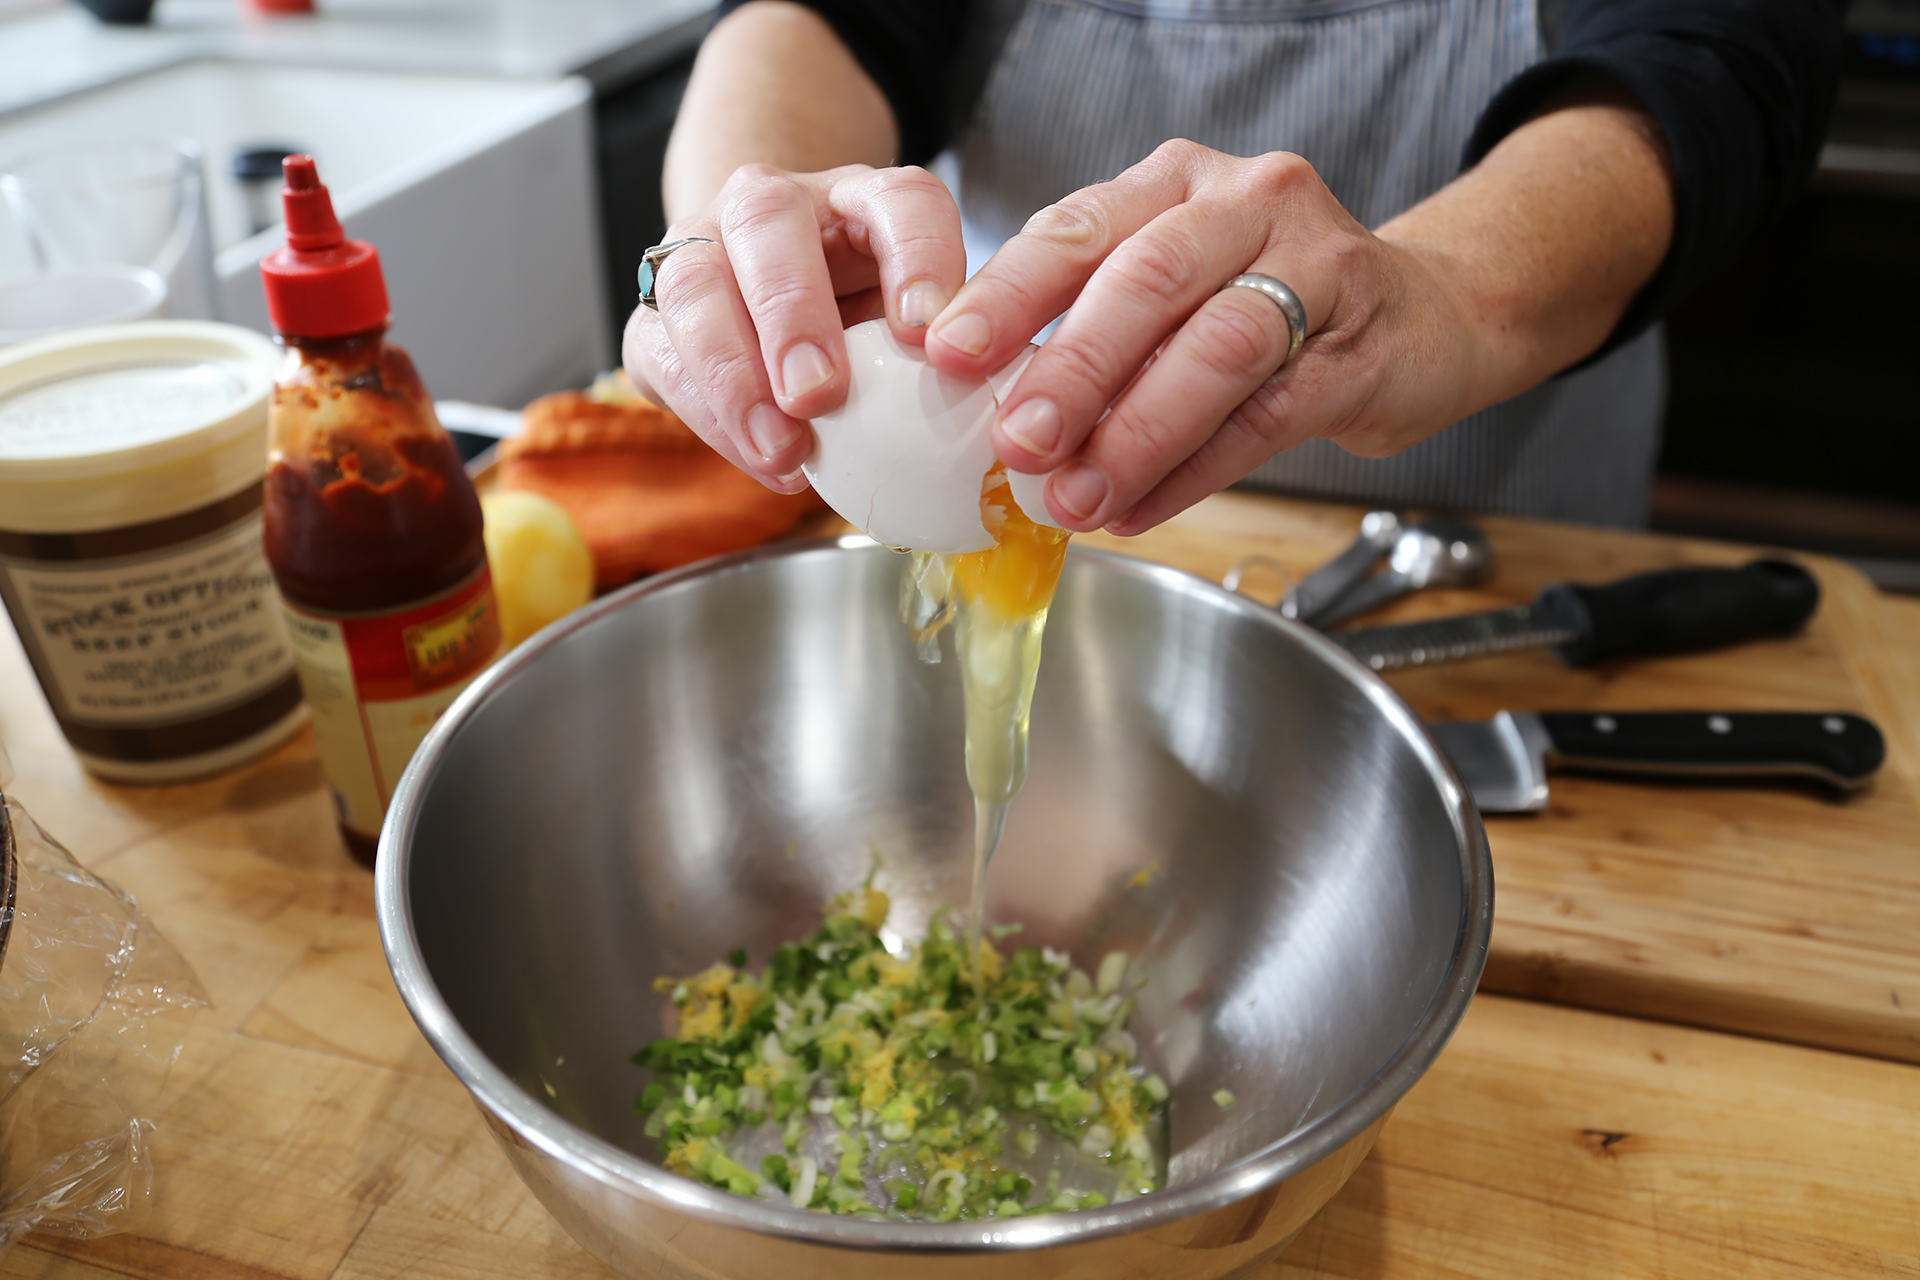 In a medium bowl add the egg, mayo, green onion, parsley and lemon zest, whisk together until combined.